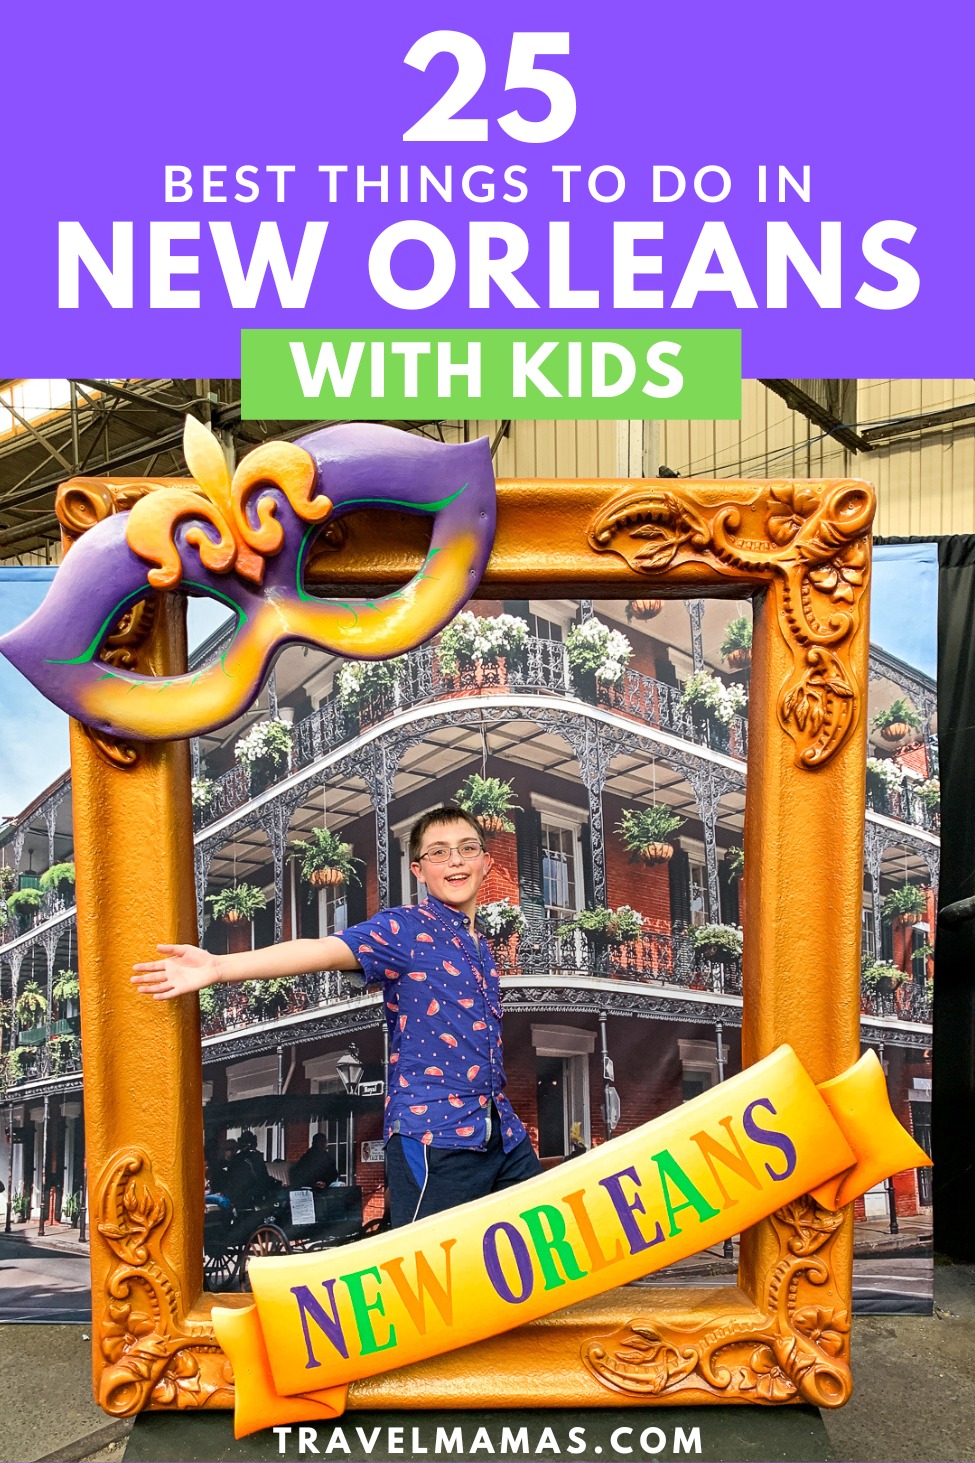 Best Things to Do in New Orleans with Kids